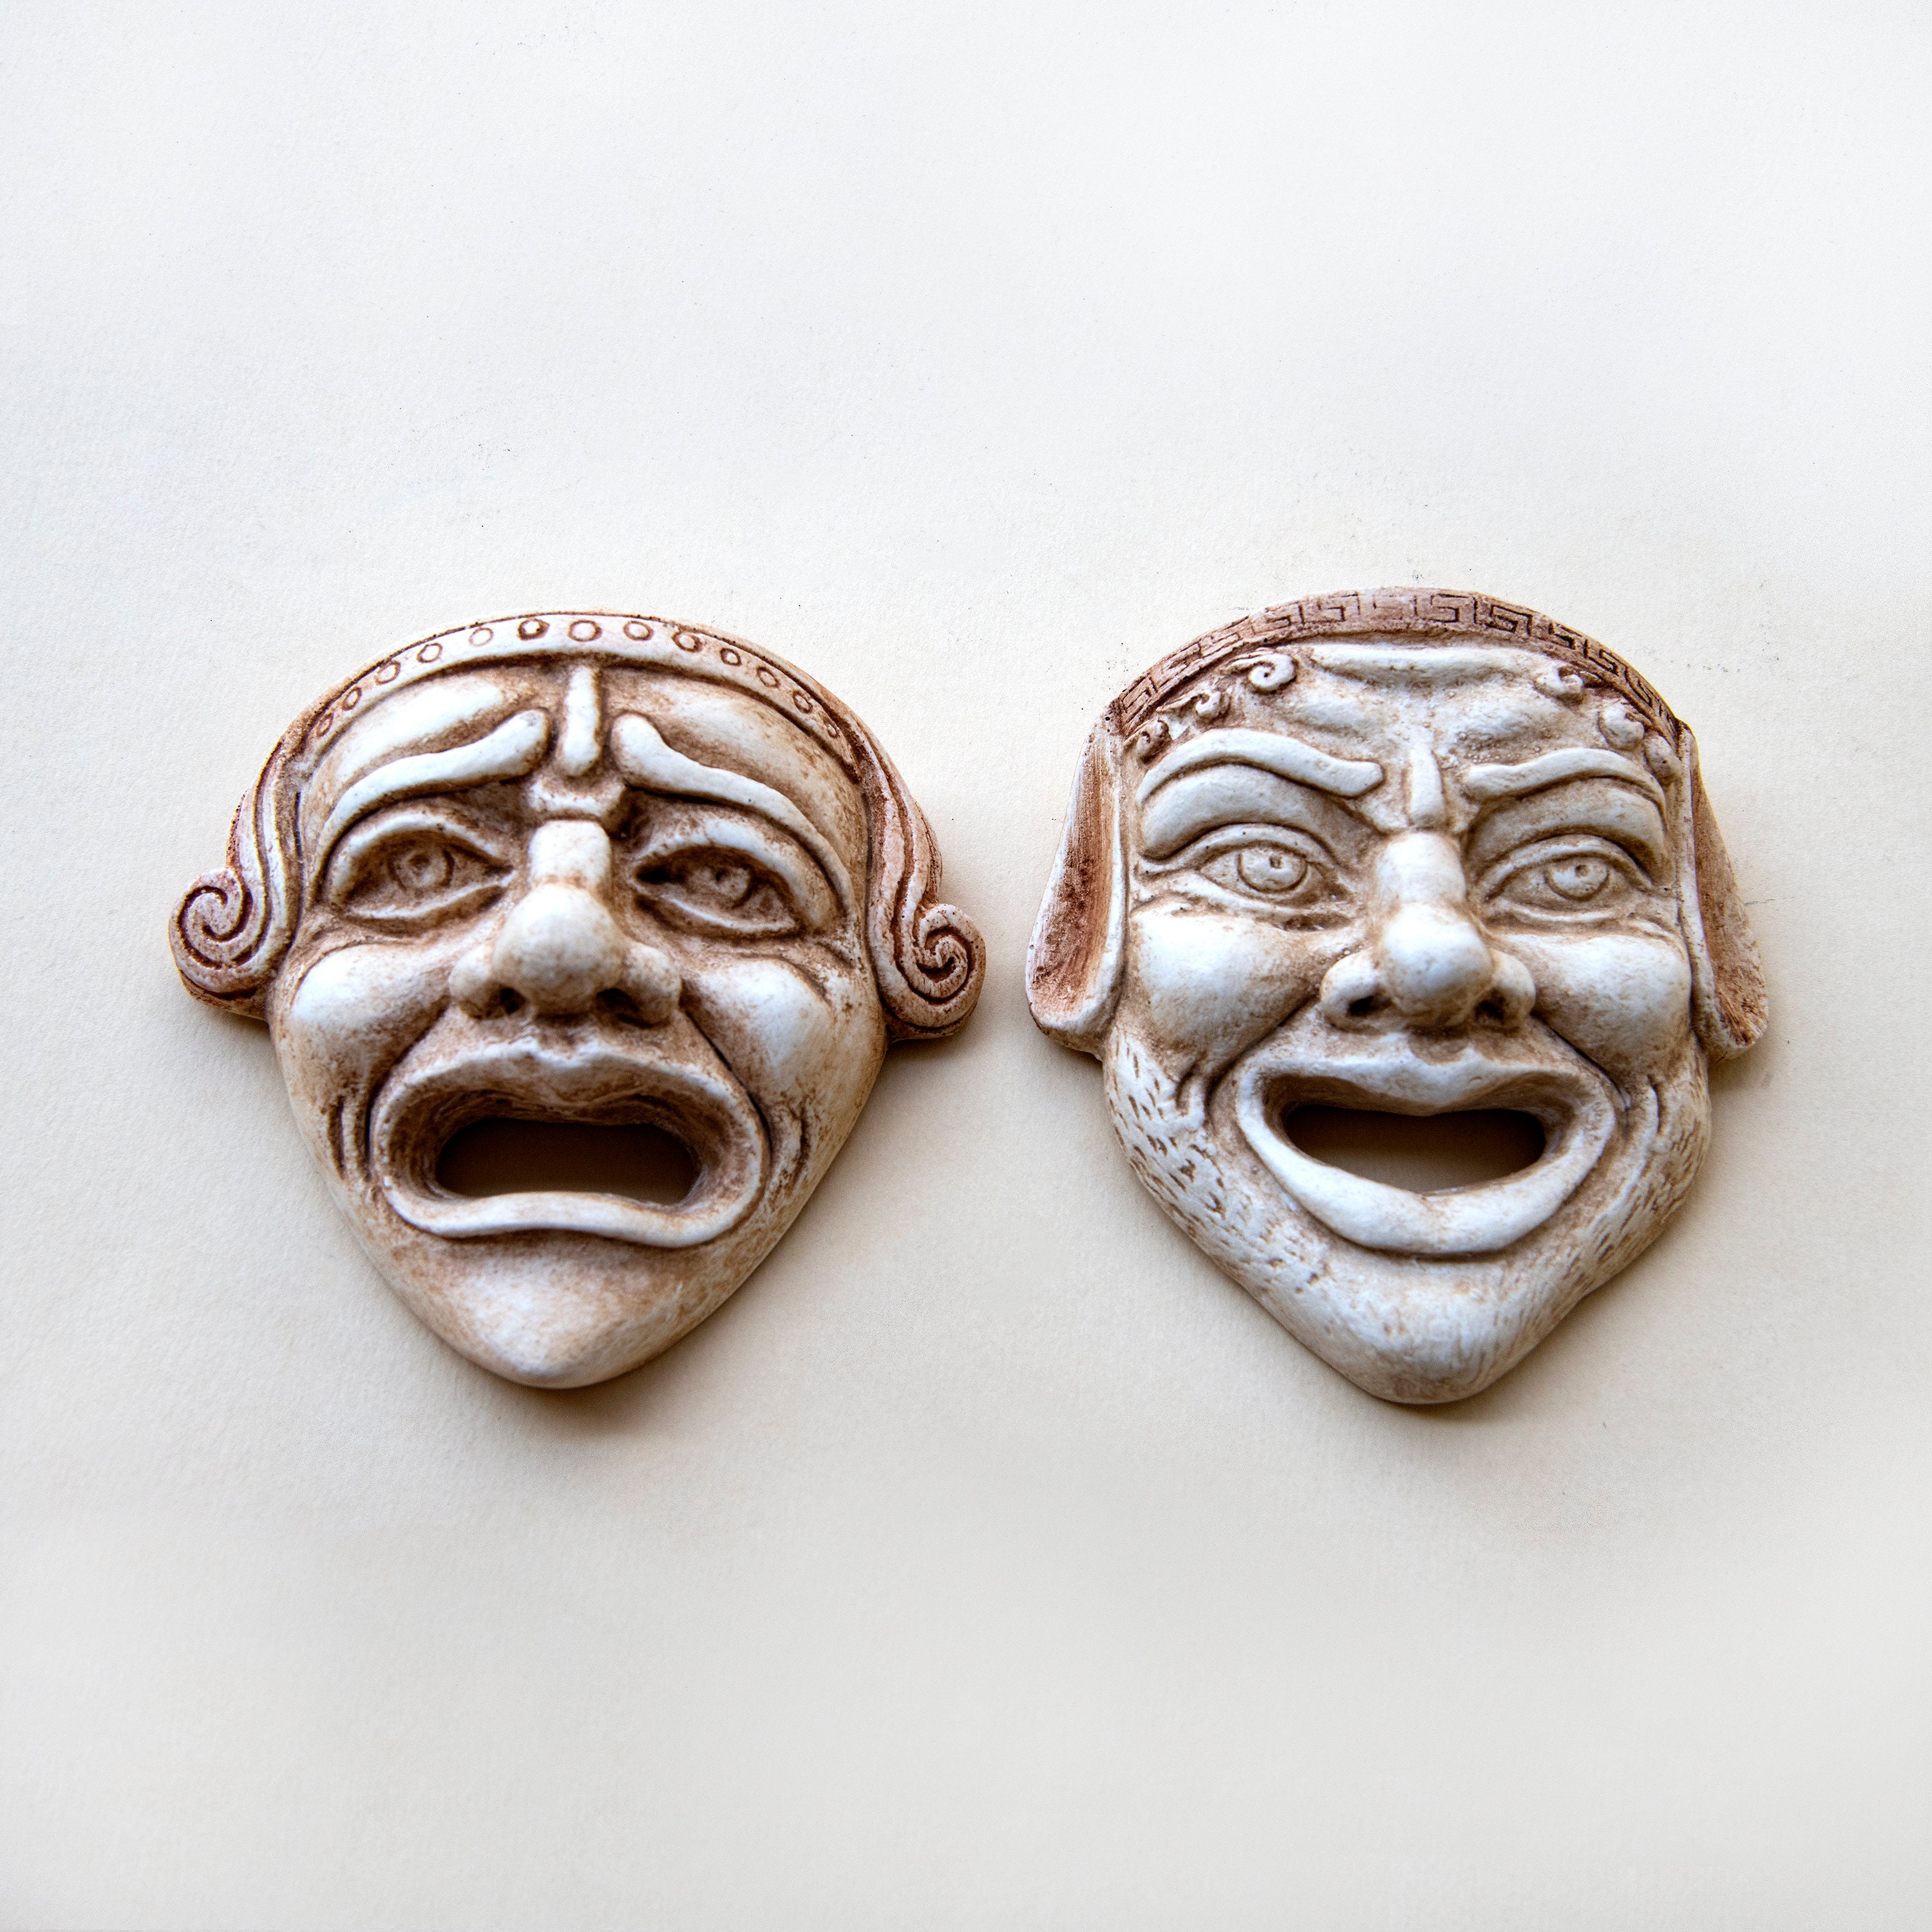 Ancient Greek Drama Theater Masks, Set of 2 Comedy/tragedy Actors Masks,  Theatre Symbol Museum Reproduction, Theatre Lover Gift 